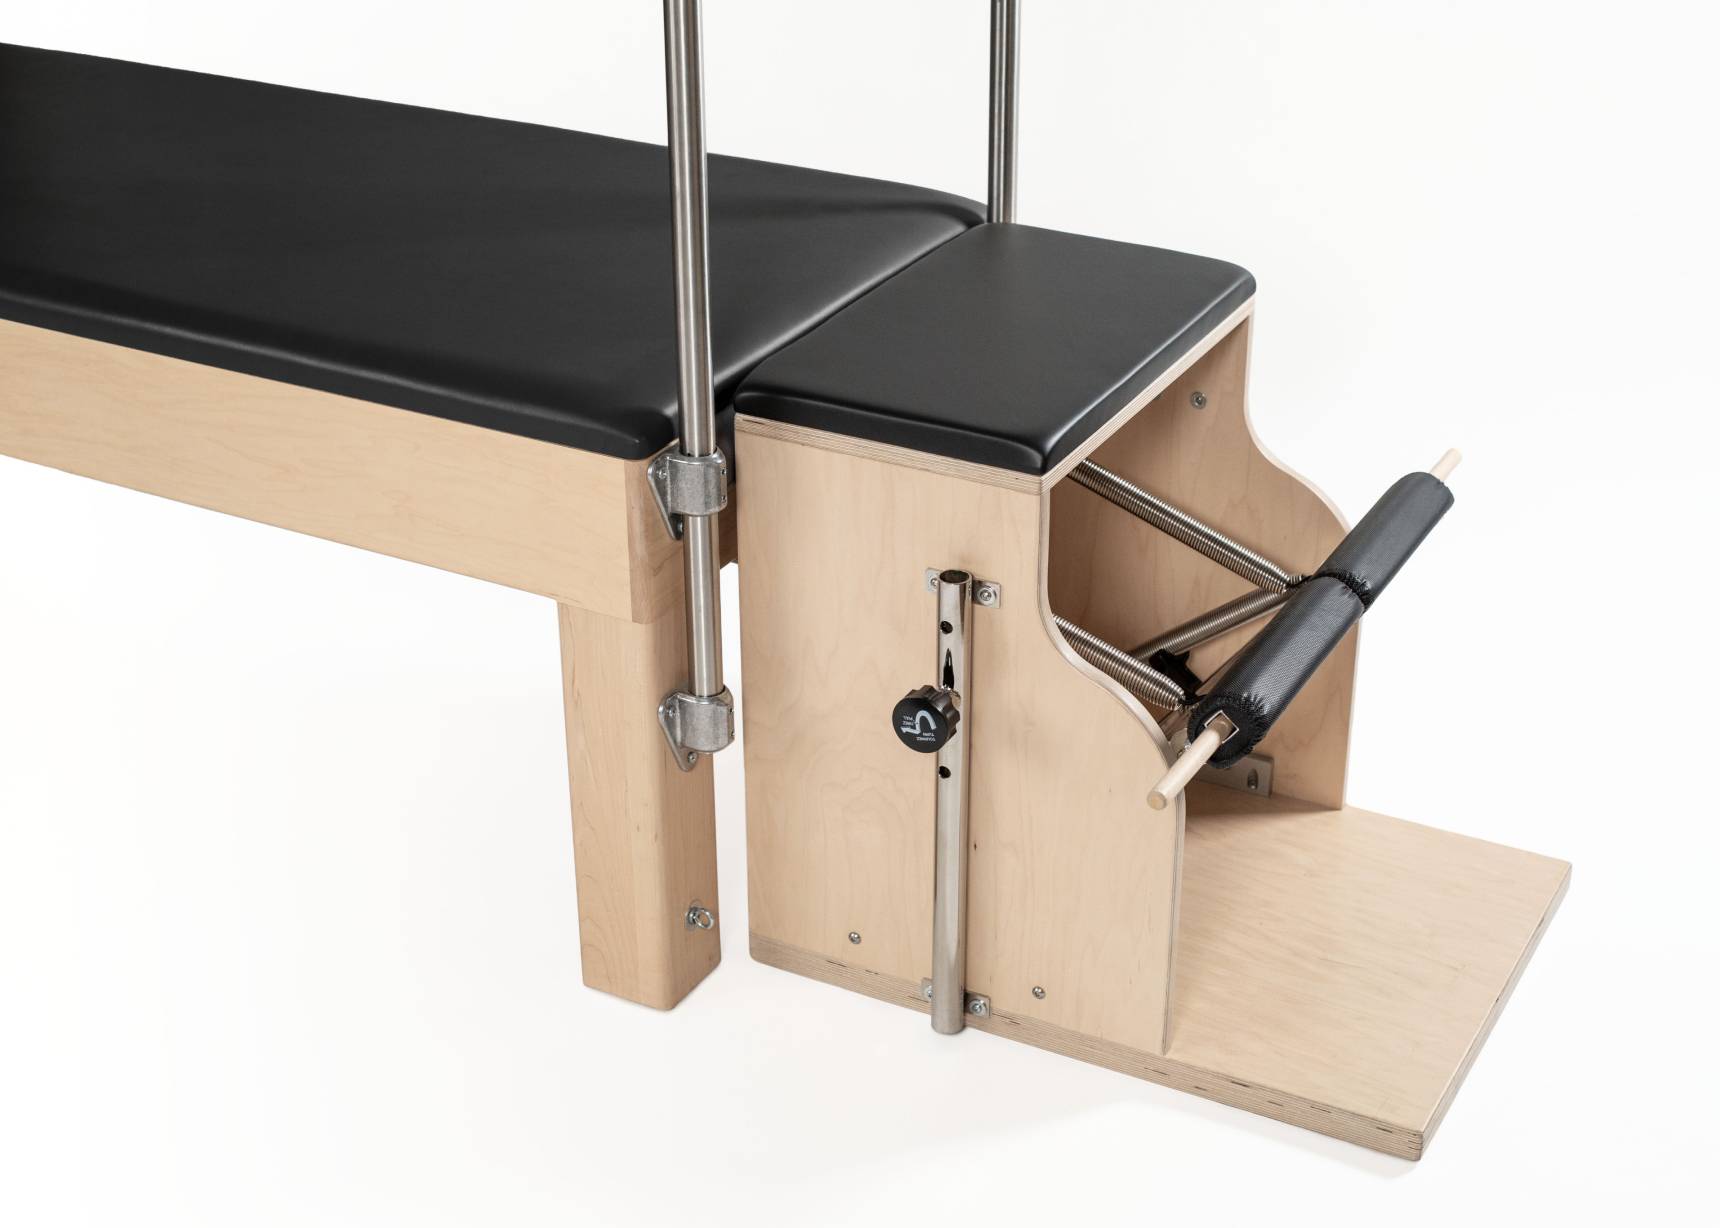 Combo-chair shown as surface extender for Trapeze Table 